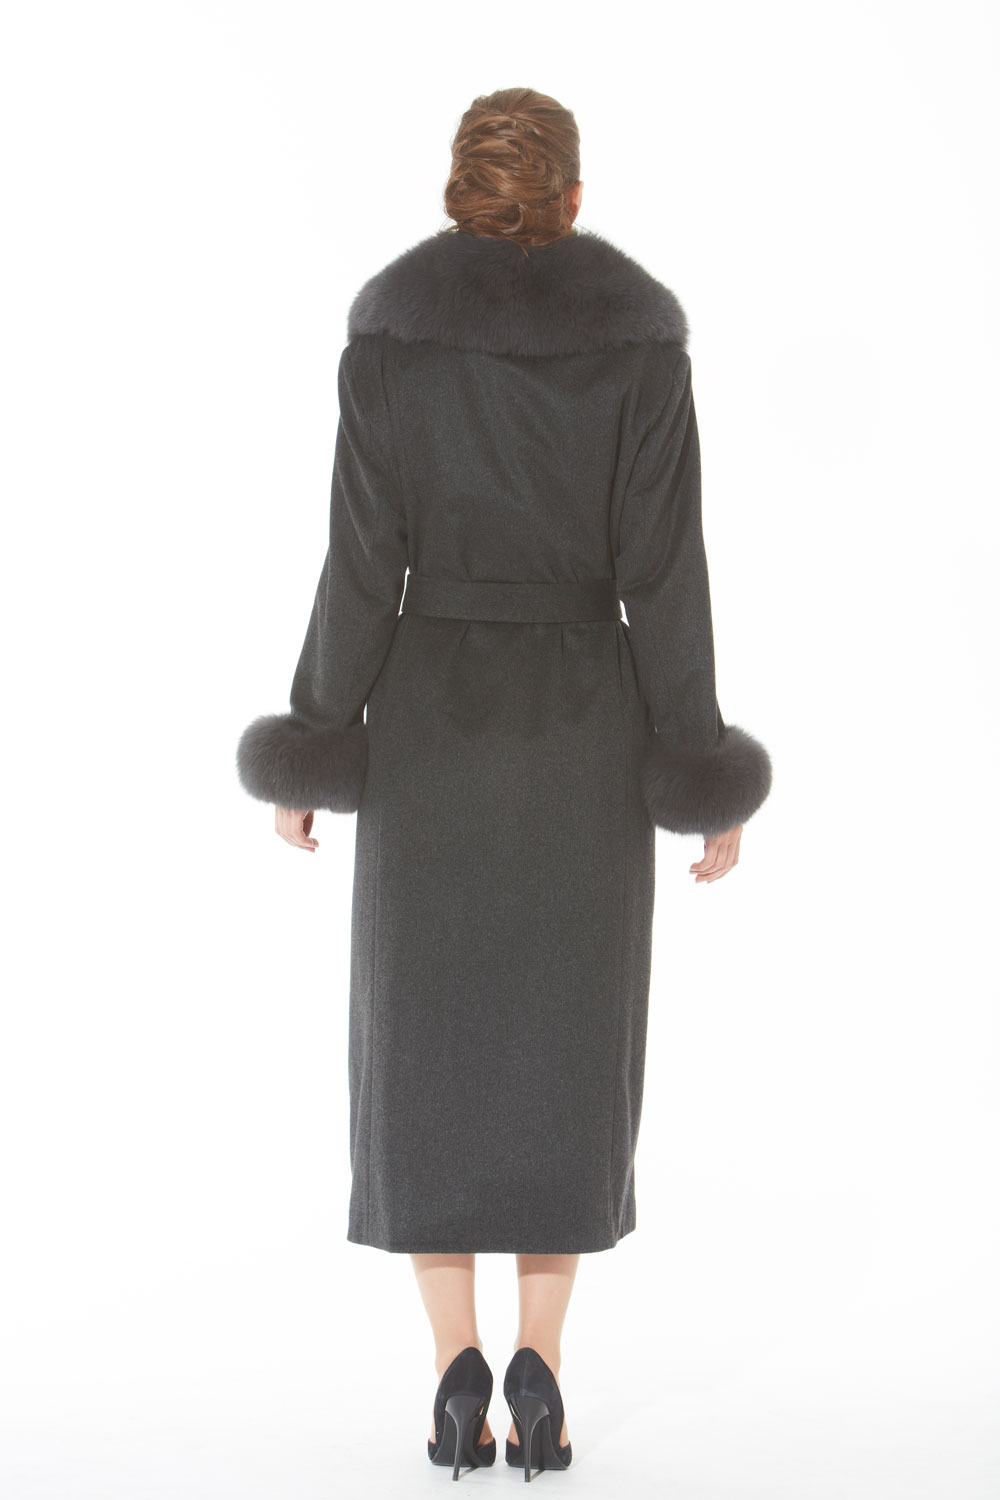 Charcoal Grey Women’s Cashmere Coat – Grey Fox Collar and Cuffs ...